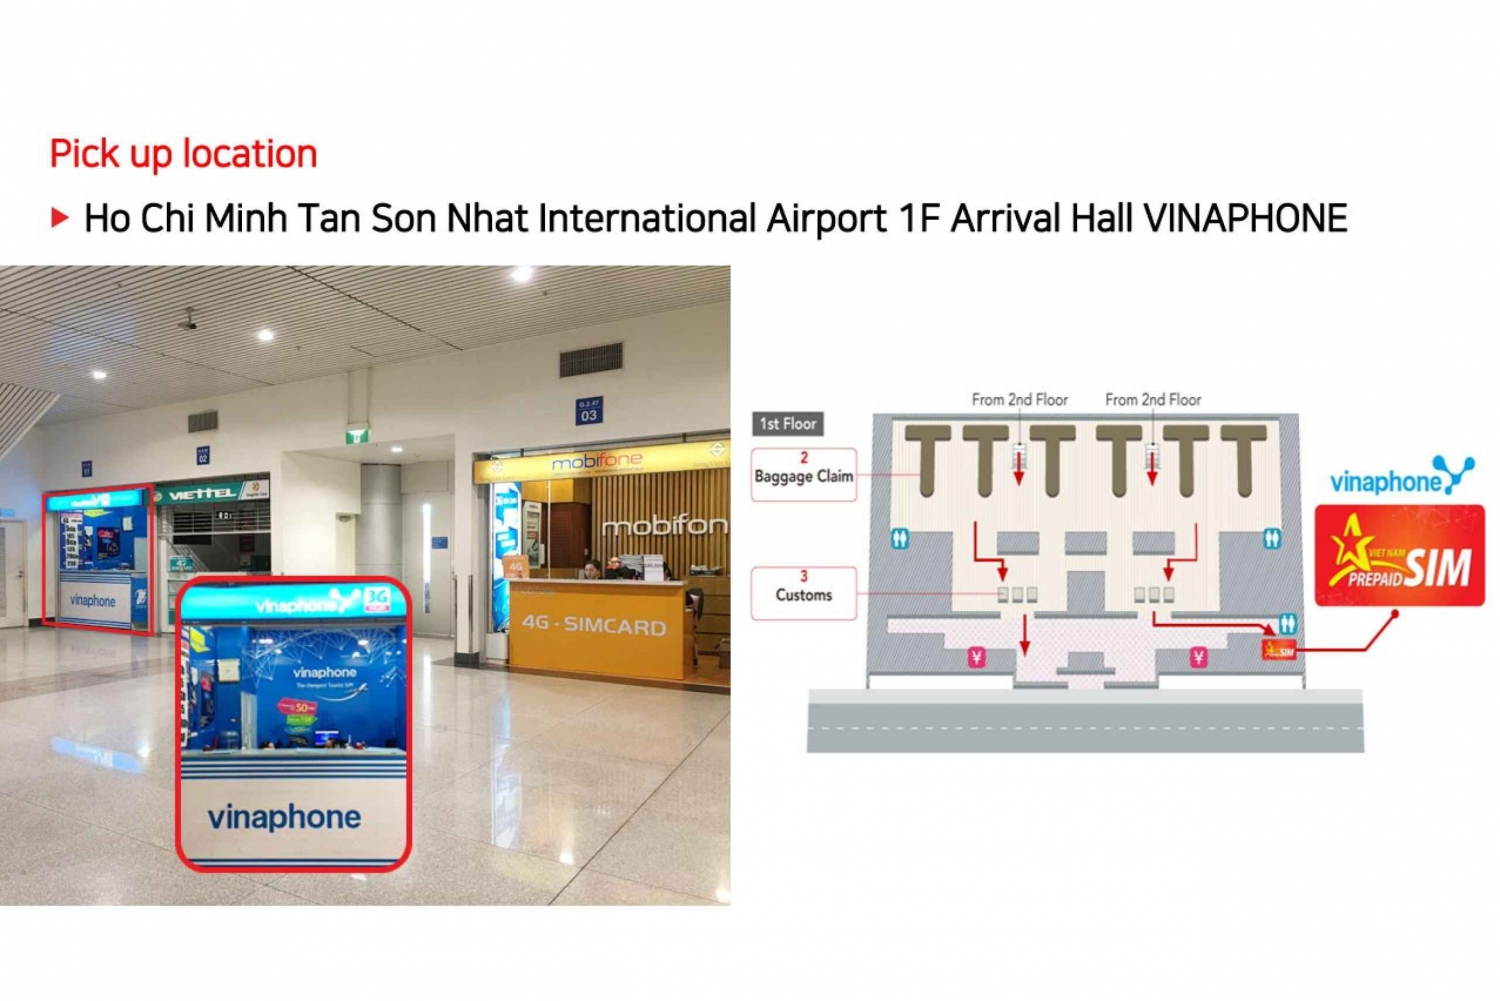 Ho Chi Minh: 4G Unlimited Data SIM Card for Airport Pickup